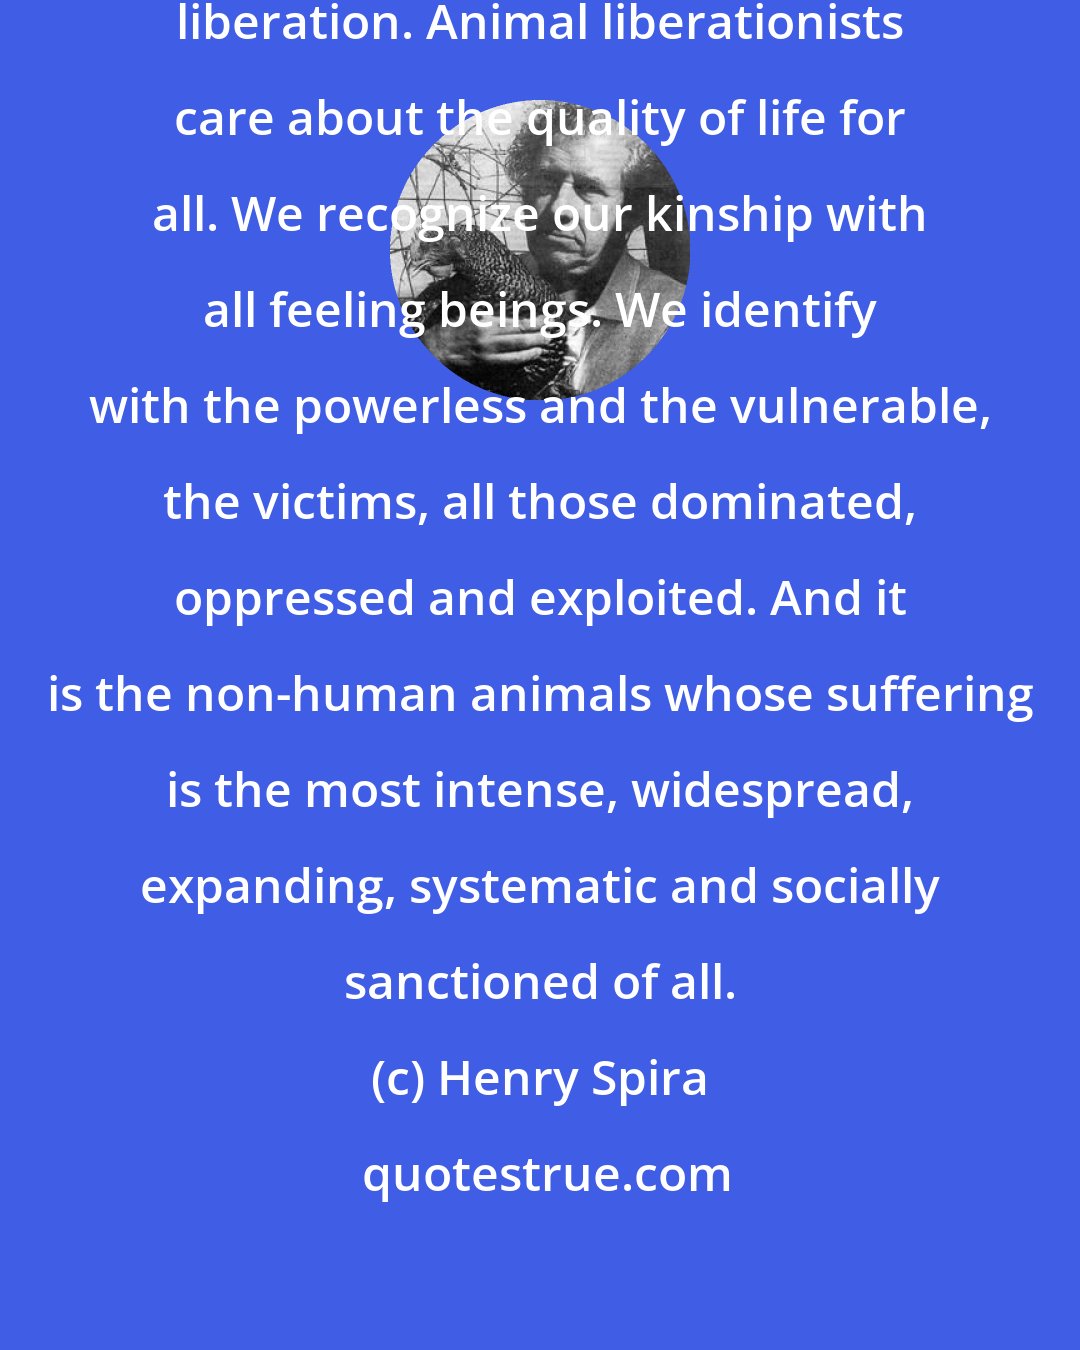 Henry Spira: Animal liberation is also human liberation. Animal liberationists care about the quality of life for all. We recognize our kinship with all feeling beings. We identify with the powerless and the vulnerable, the victims, all those dominated, oppressed and exploited. And it is the non-human animals whose suffering is the most intense, widespread, expanding, systematic and socially sanctioned of all.